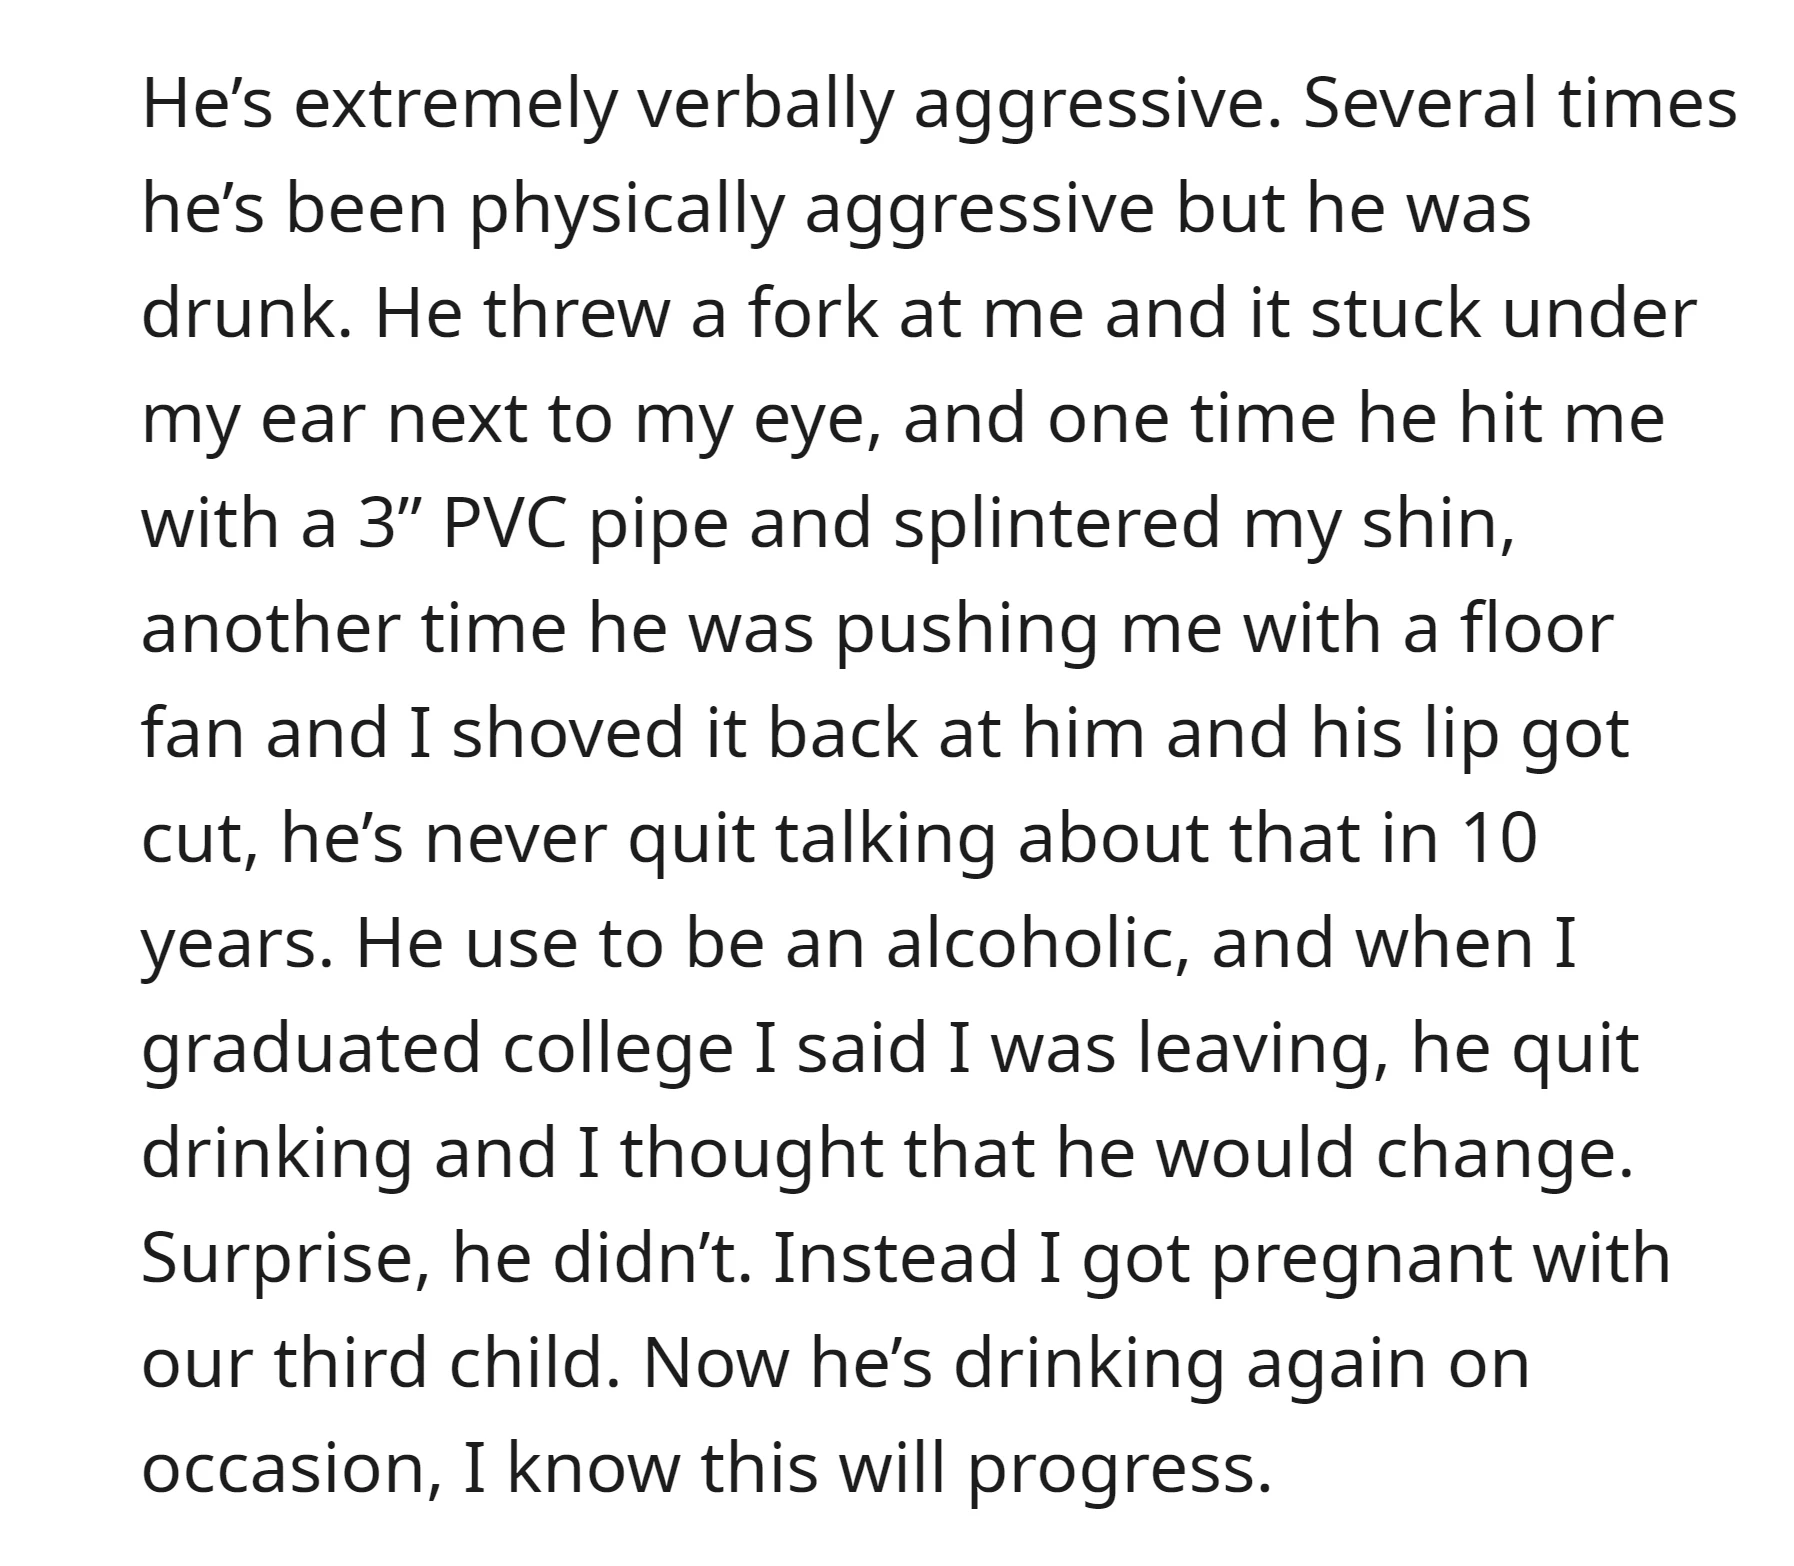 OP's husband, formerly an alcoholic, has displayed verbal and occasional physical aggression